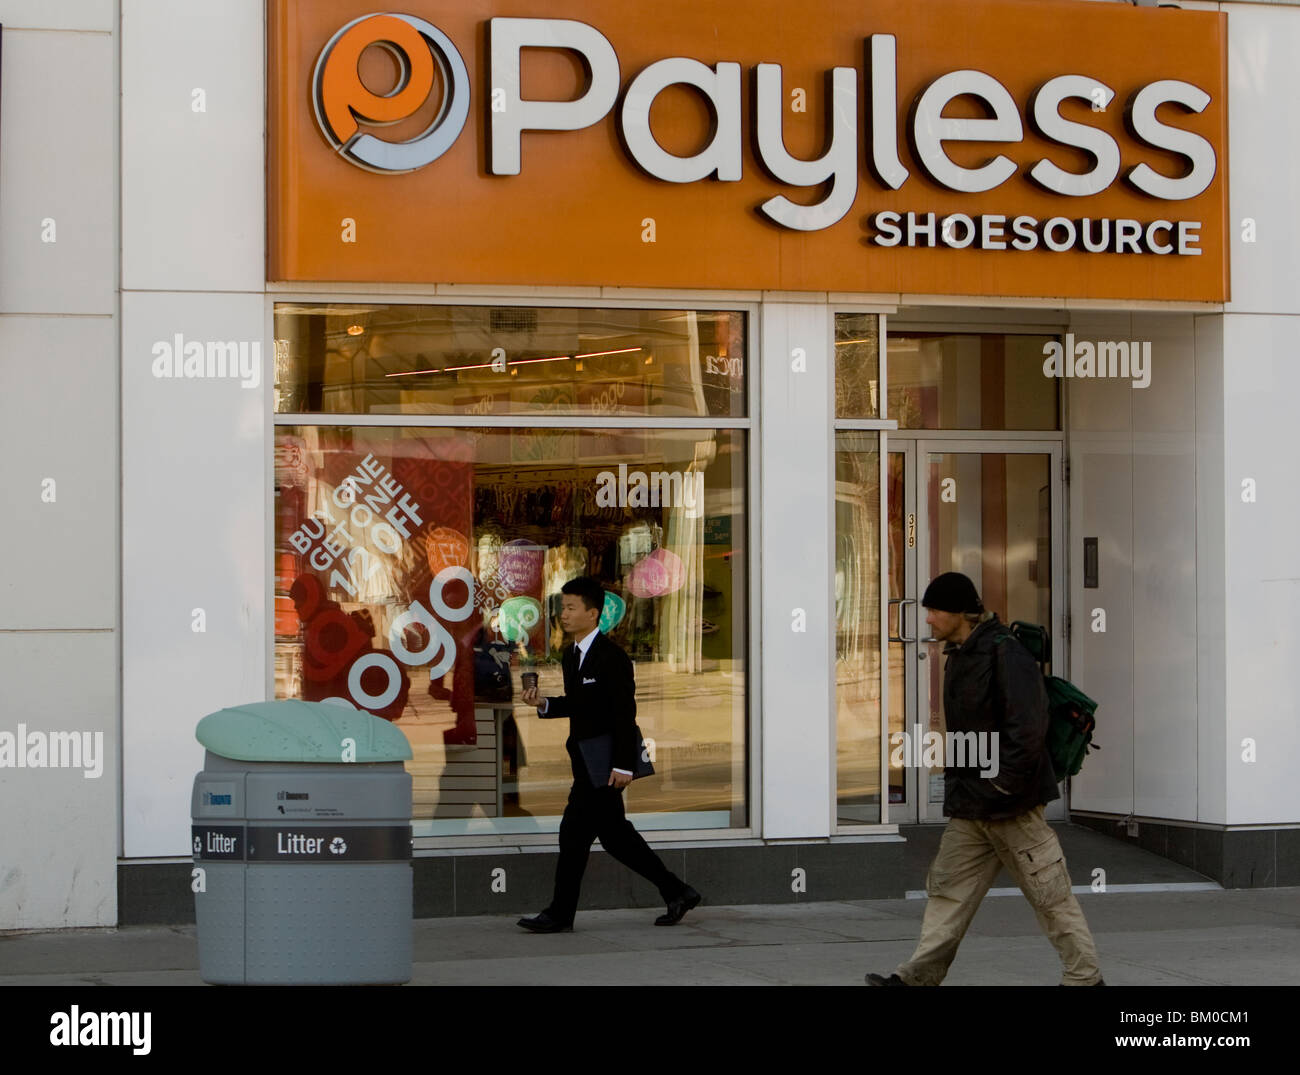 A Payless Shoesource store is pictured in Toronto. Payless ShoeSource is a discount footwear retailer. Stock Photo